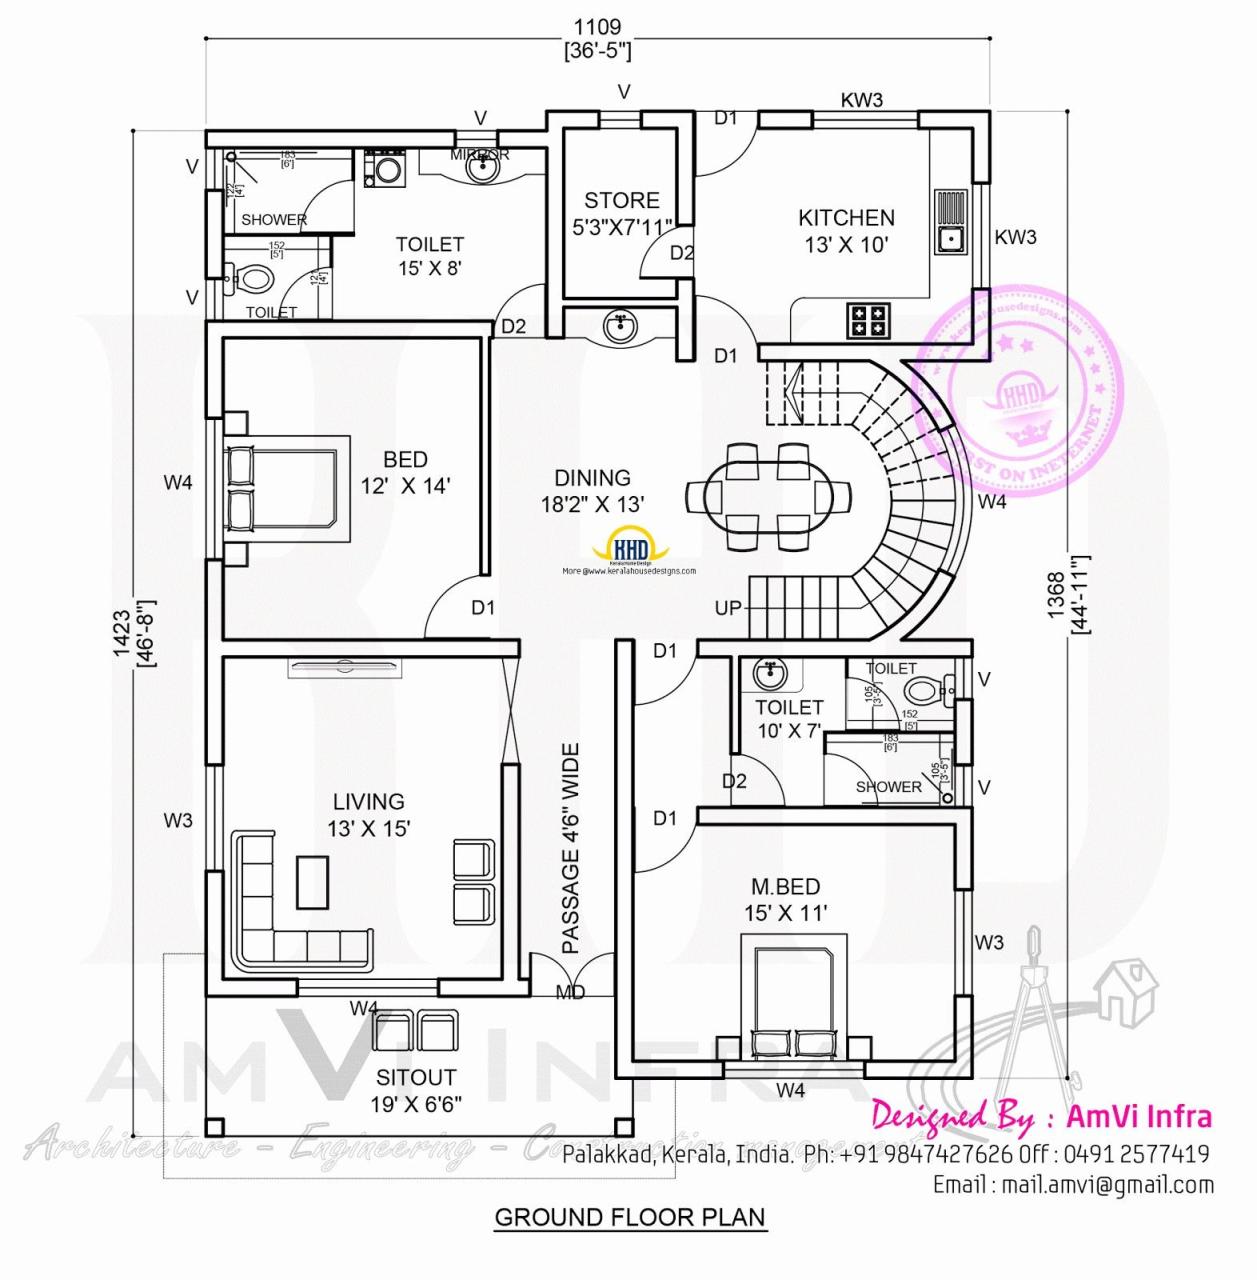 Duplex House Floor Plans Indian Style Unique 5 Bedroom Ripping House